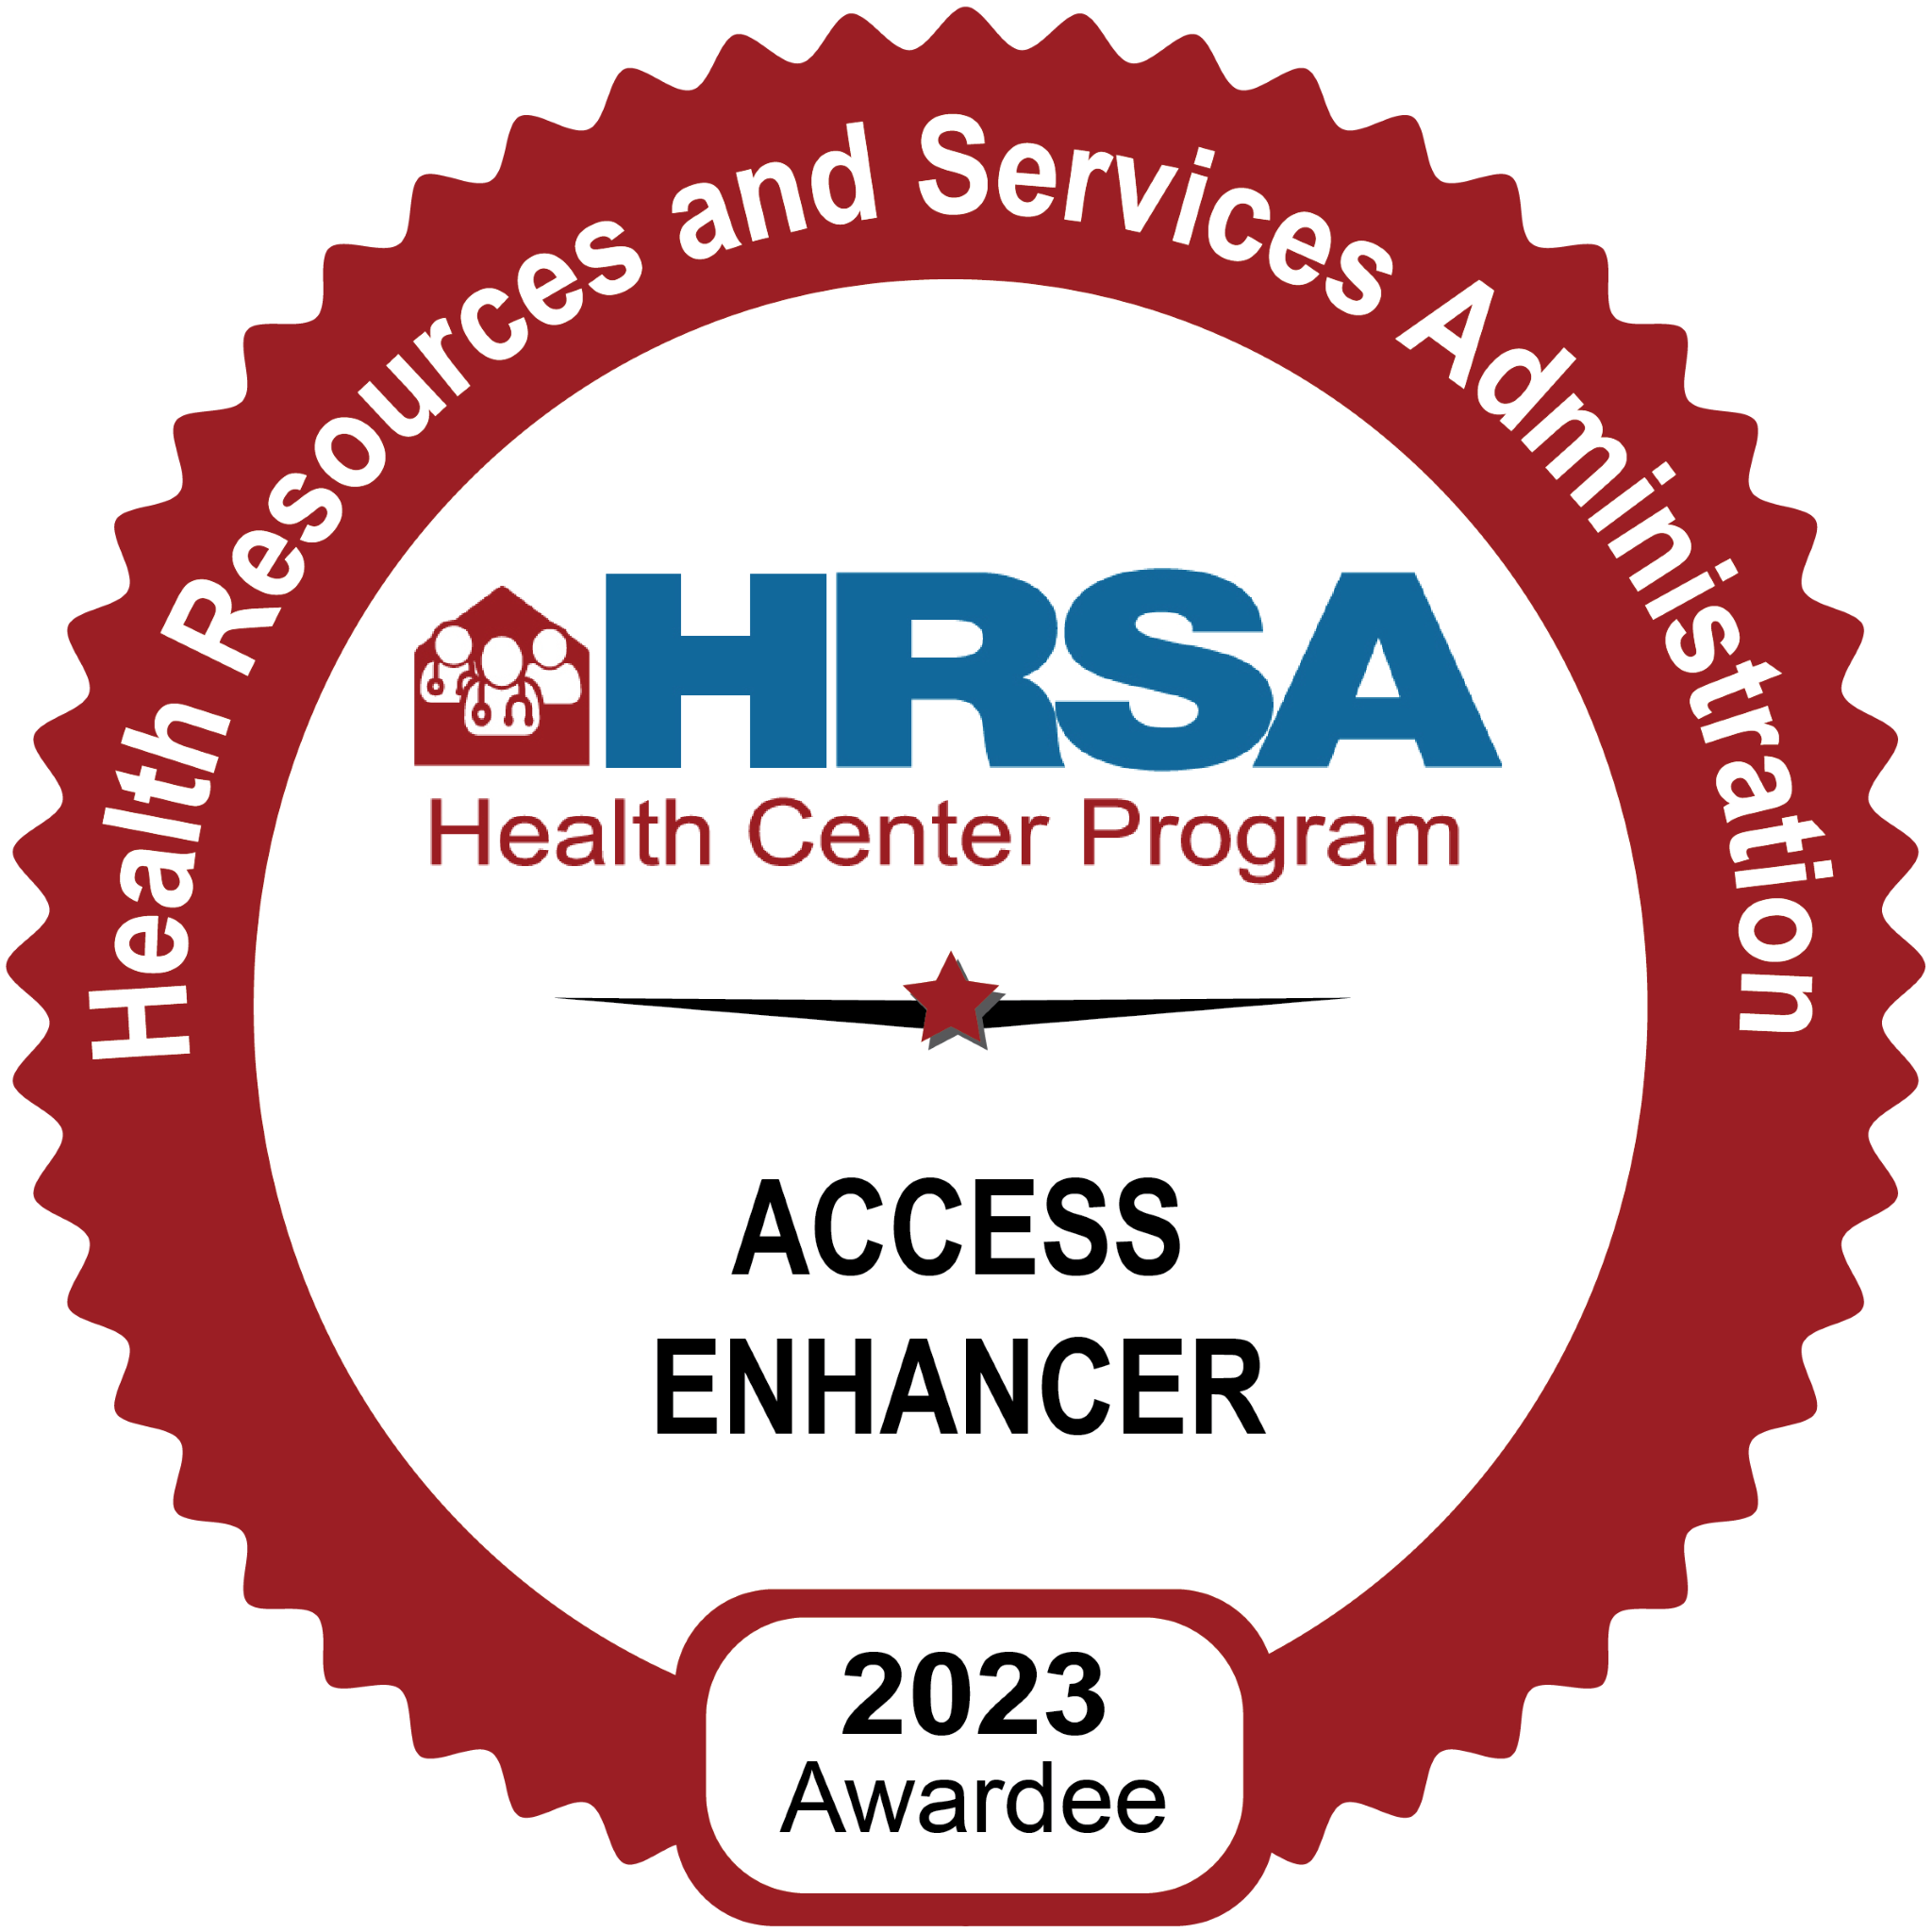 2023 AE HRSA.png